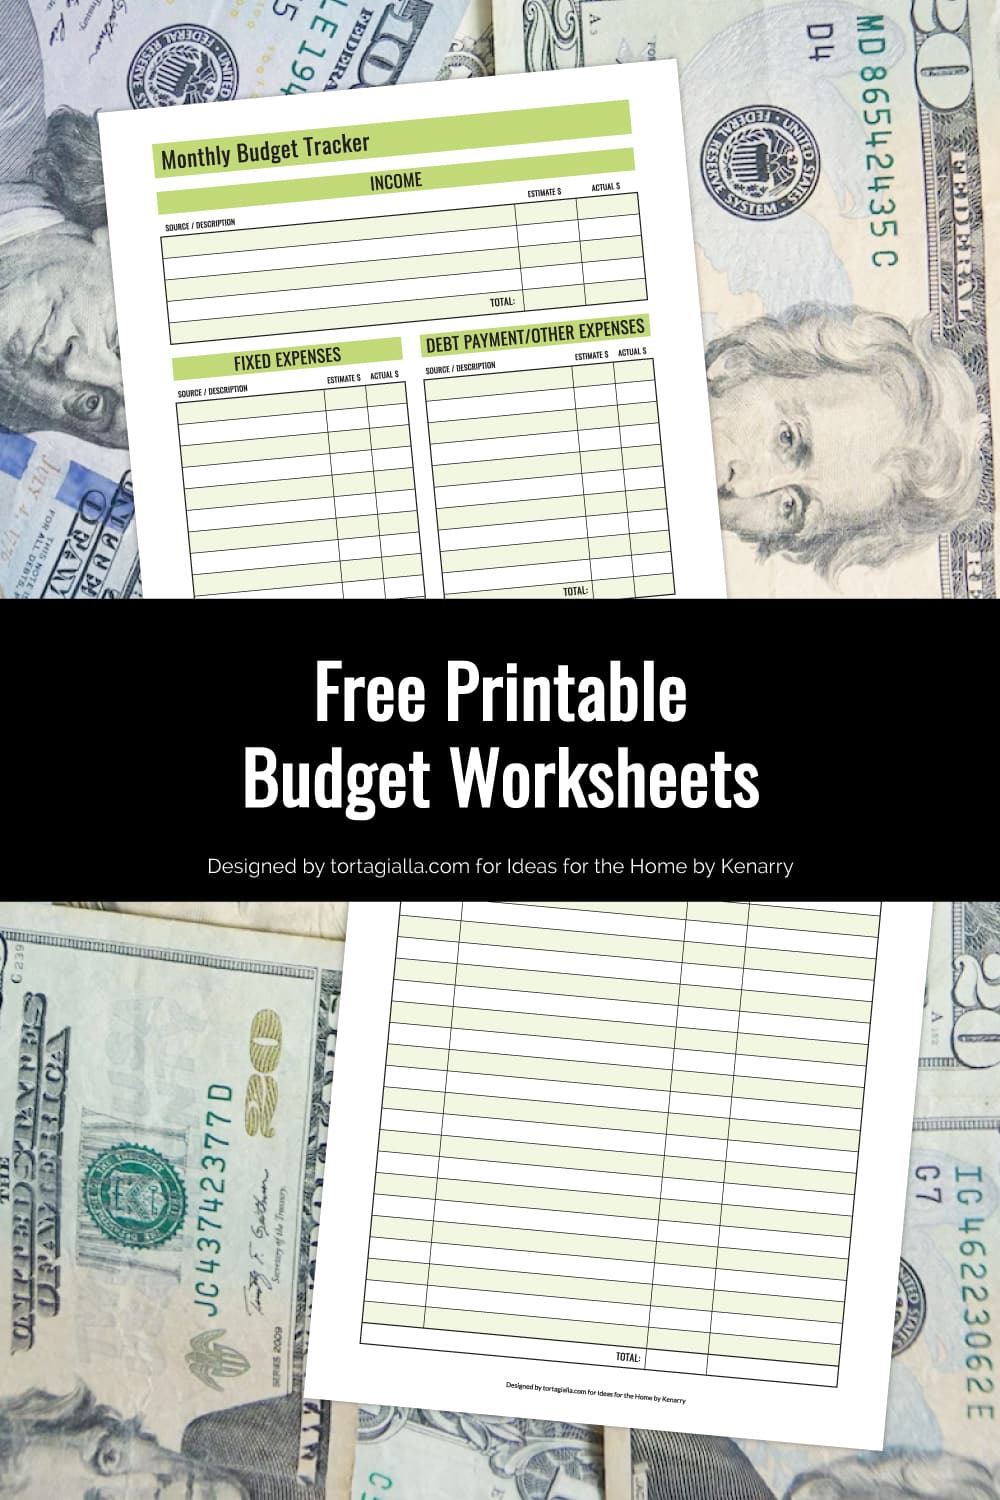 Preview of monthly budget tracker and expenses worksheet printable on top of background with US dollar bills.